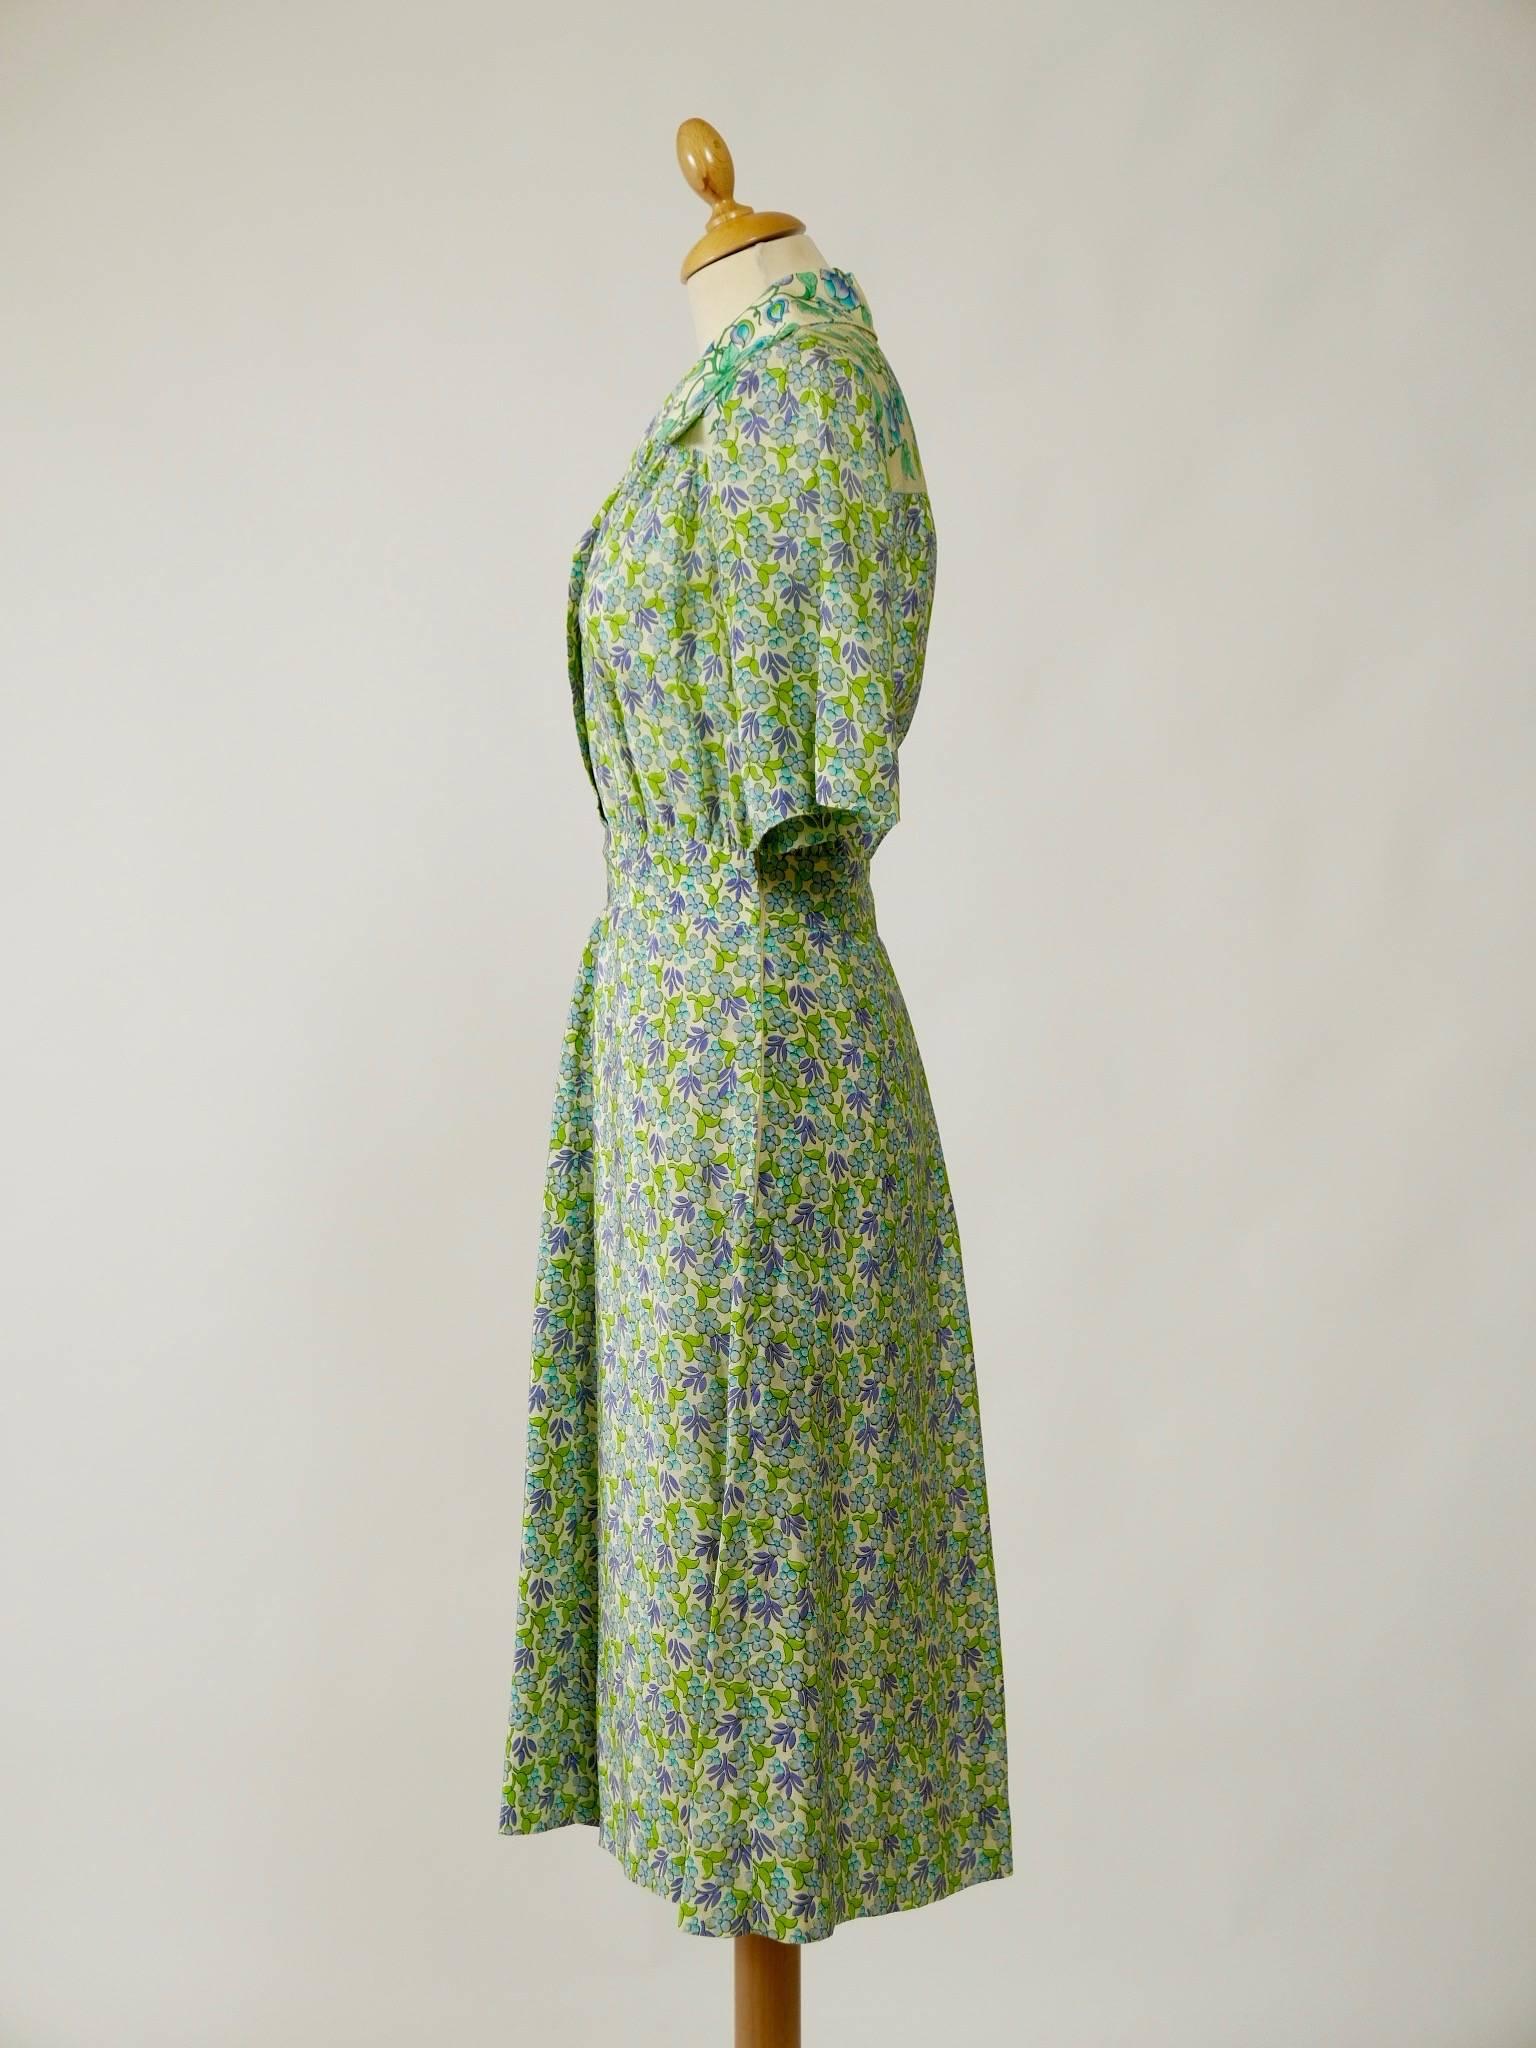 This amazing Oleg Cassini 1970s dress is in a signed lovely floral print silk fabric. It has short sleeves, fitted waist, side zip closure and frontal buttons and the skirt is lined.

NOTES:
OLEG CASSINI
Cassini, Oleg, 1913–2006, American